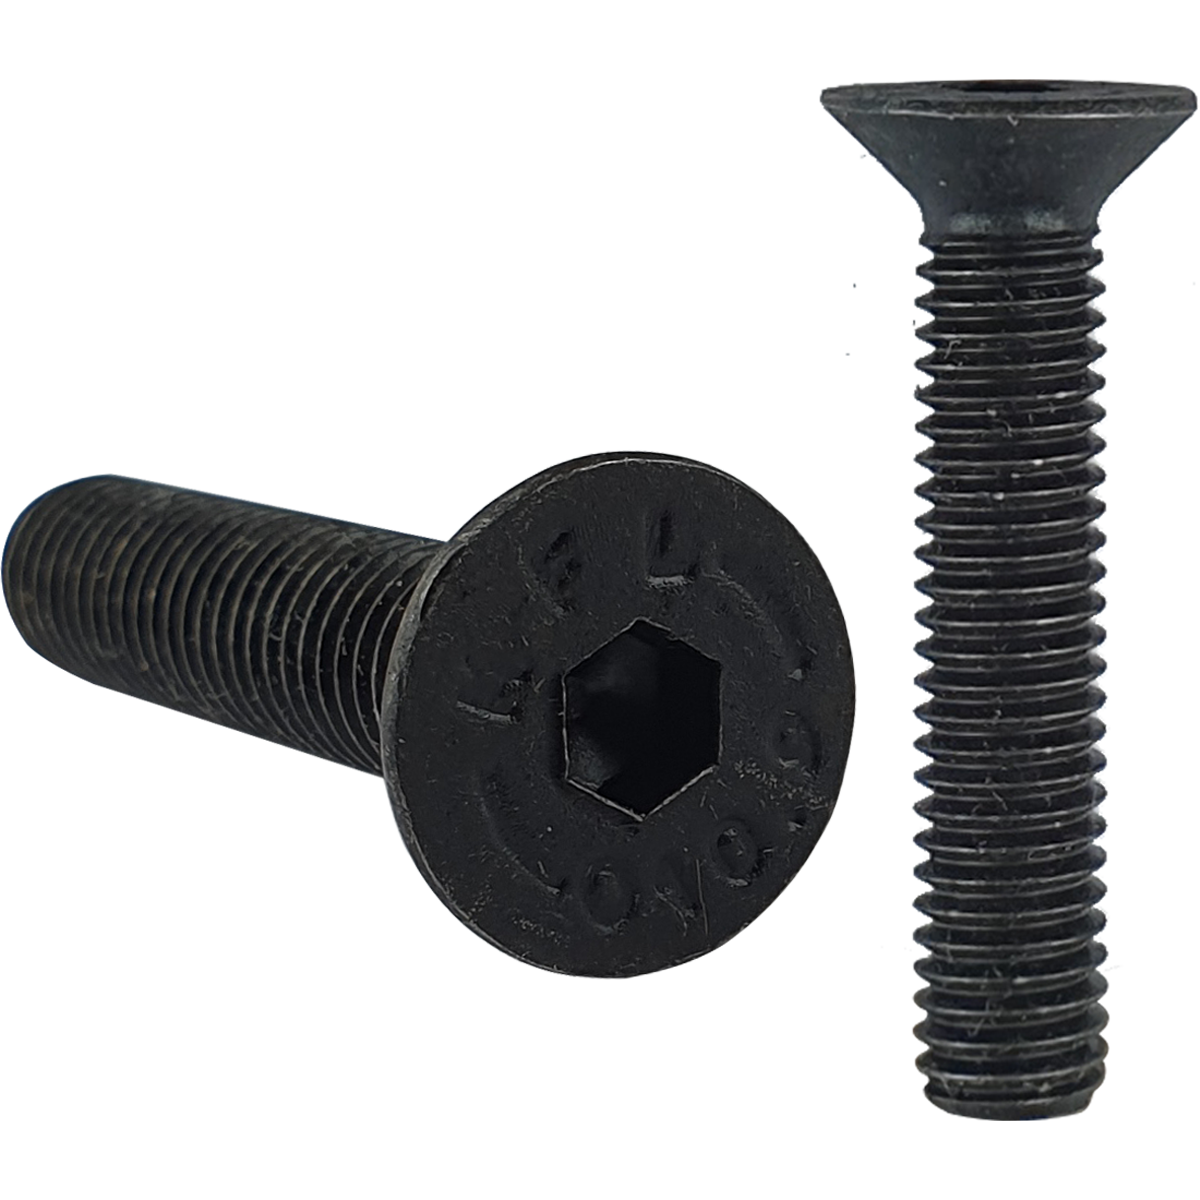 Self colour, hex socket, countersunk machine screws. A countersunk screw allowing a flush finish to the materials surface.